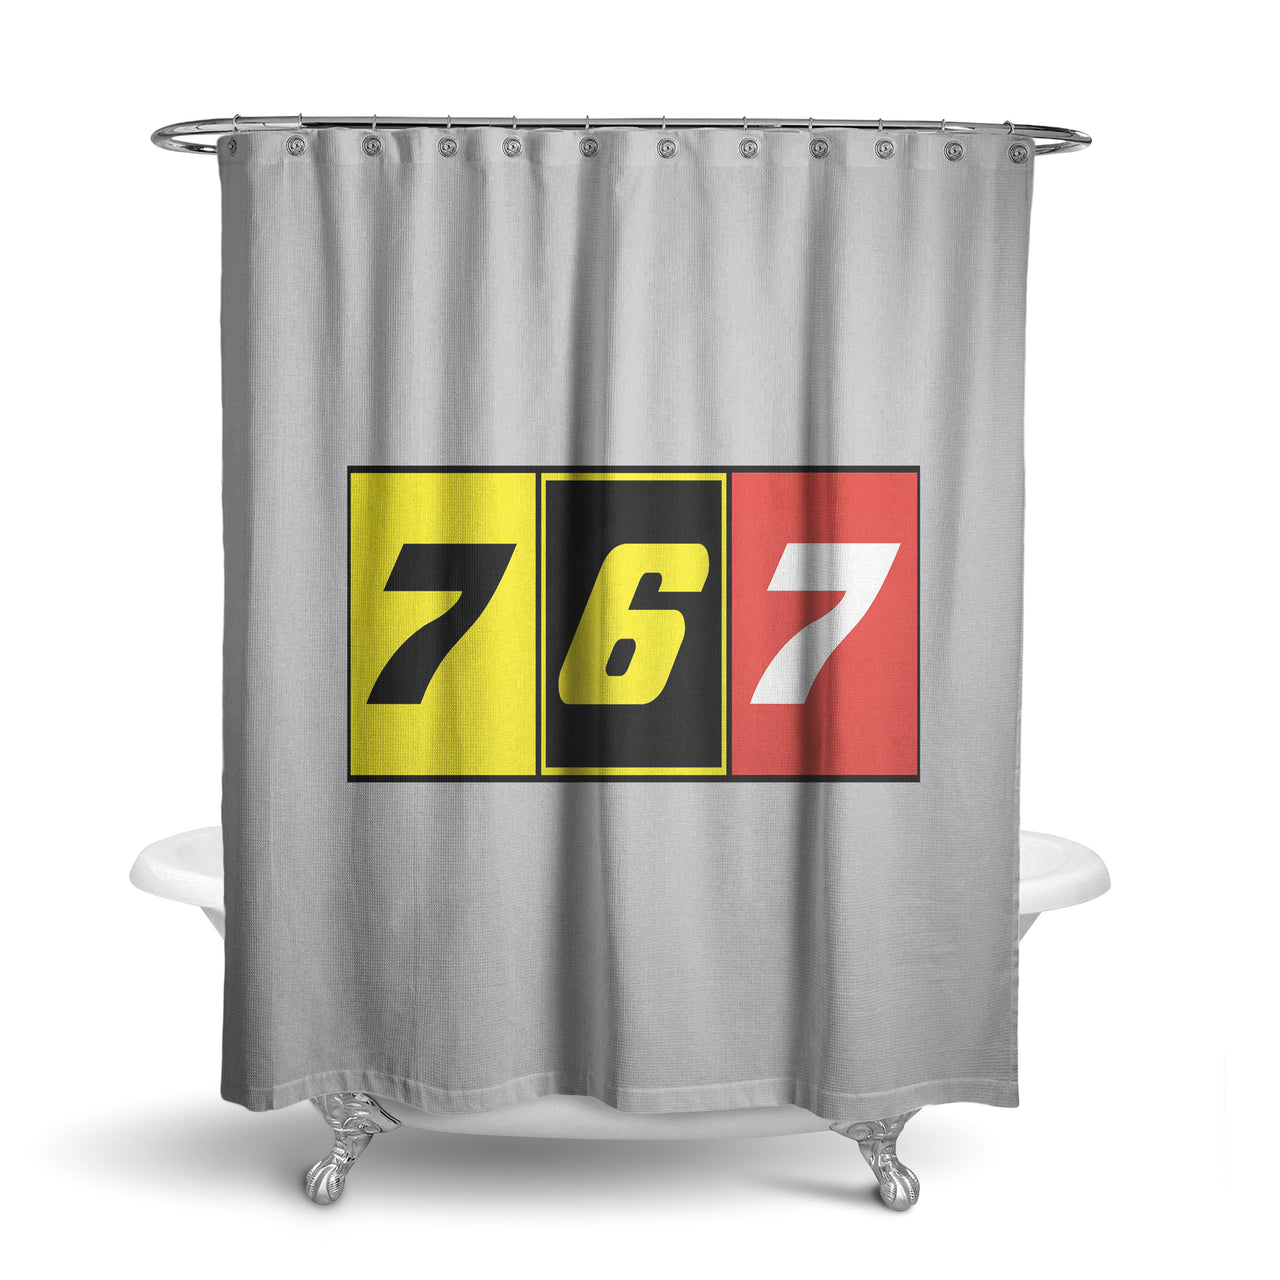 Flat Colourful 767 Designed Shower Curtains